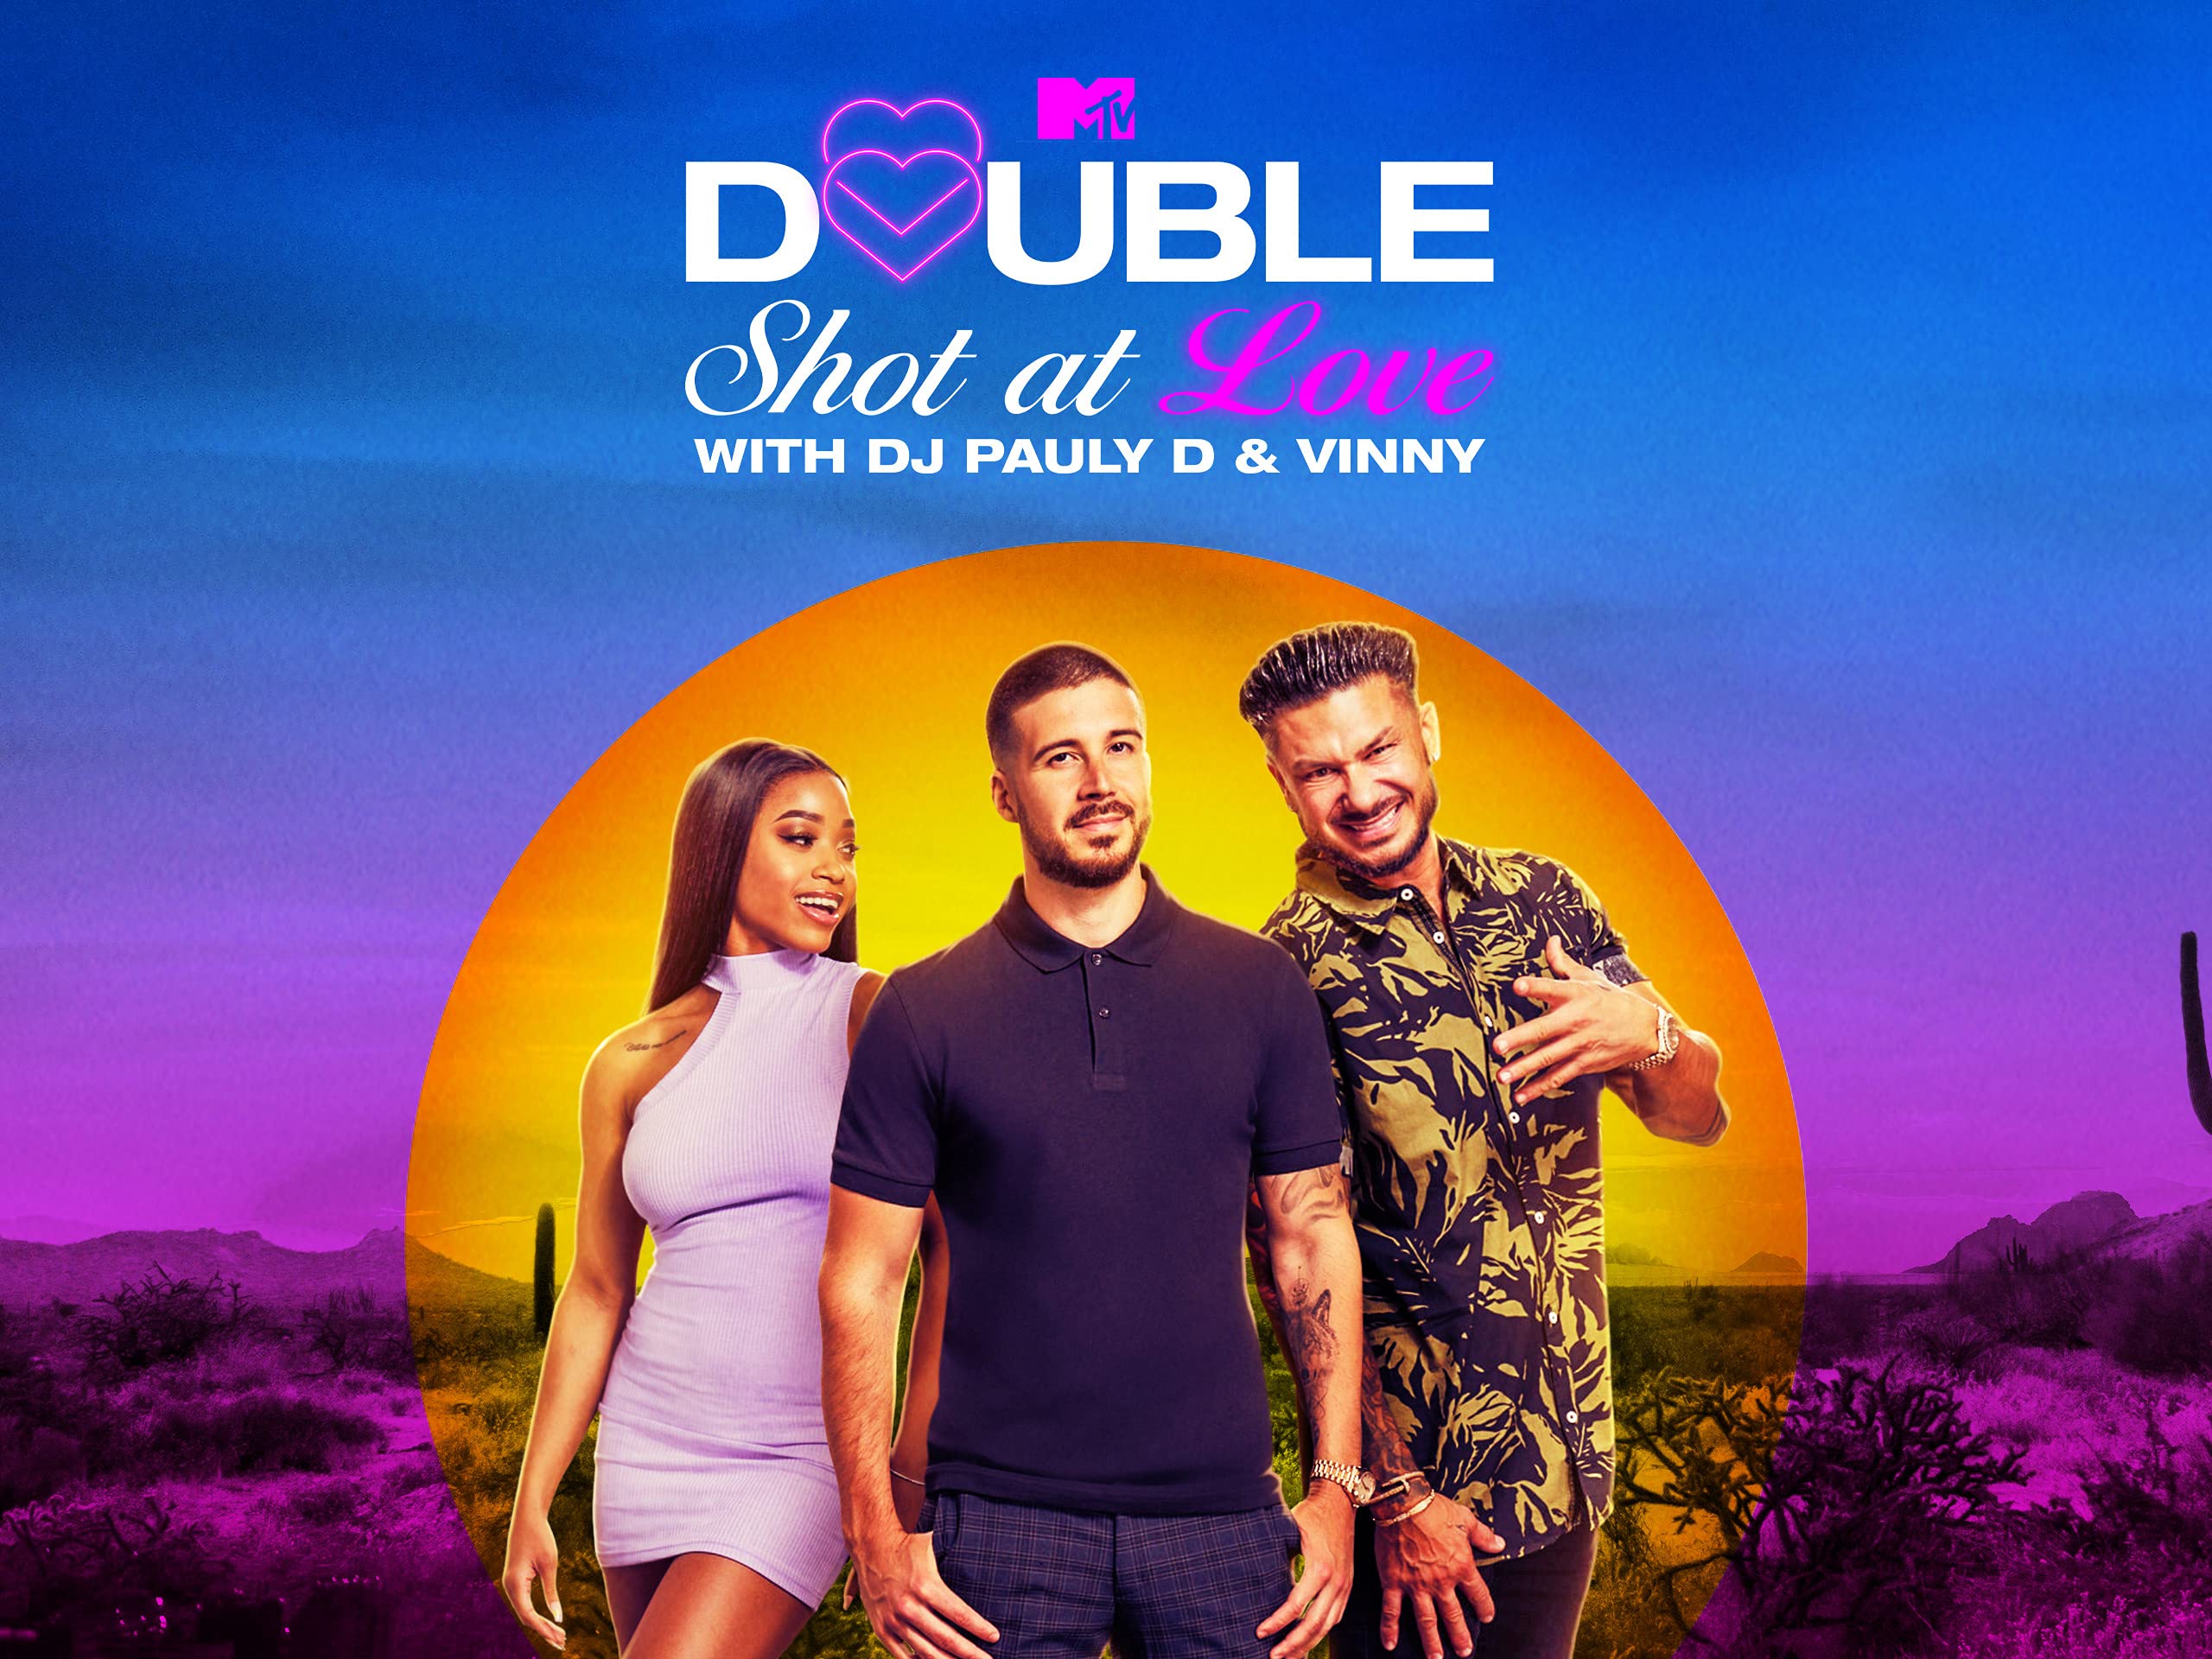 All About The Latest Season of “Double Shot at Love”